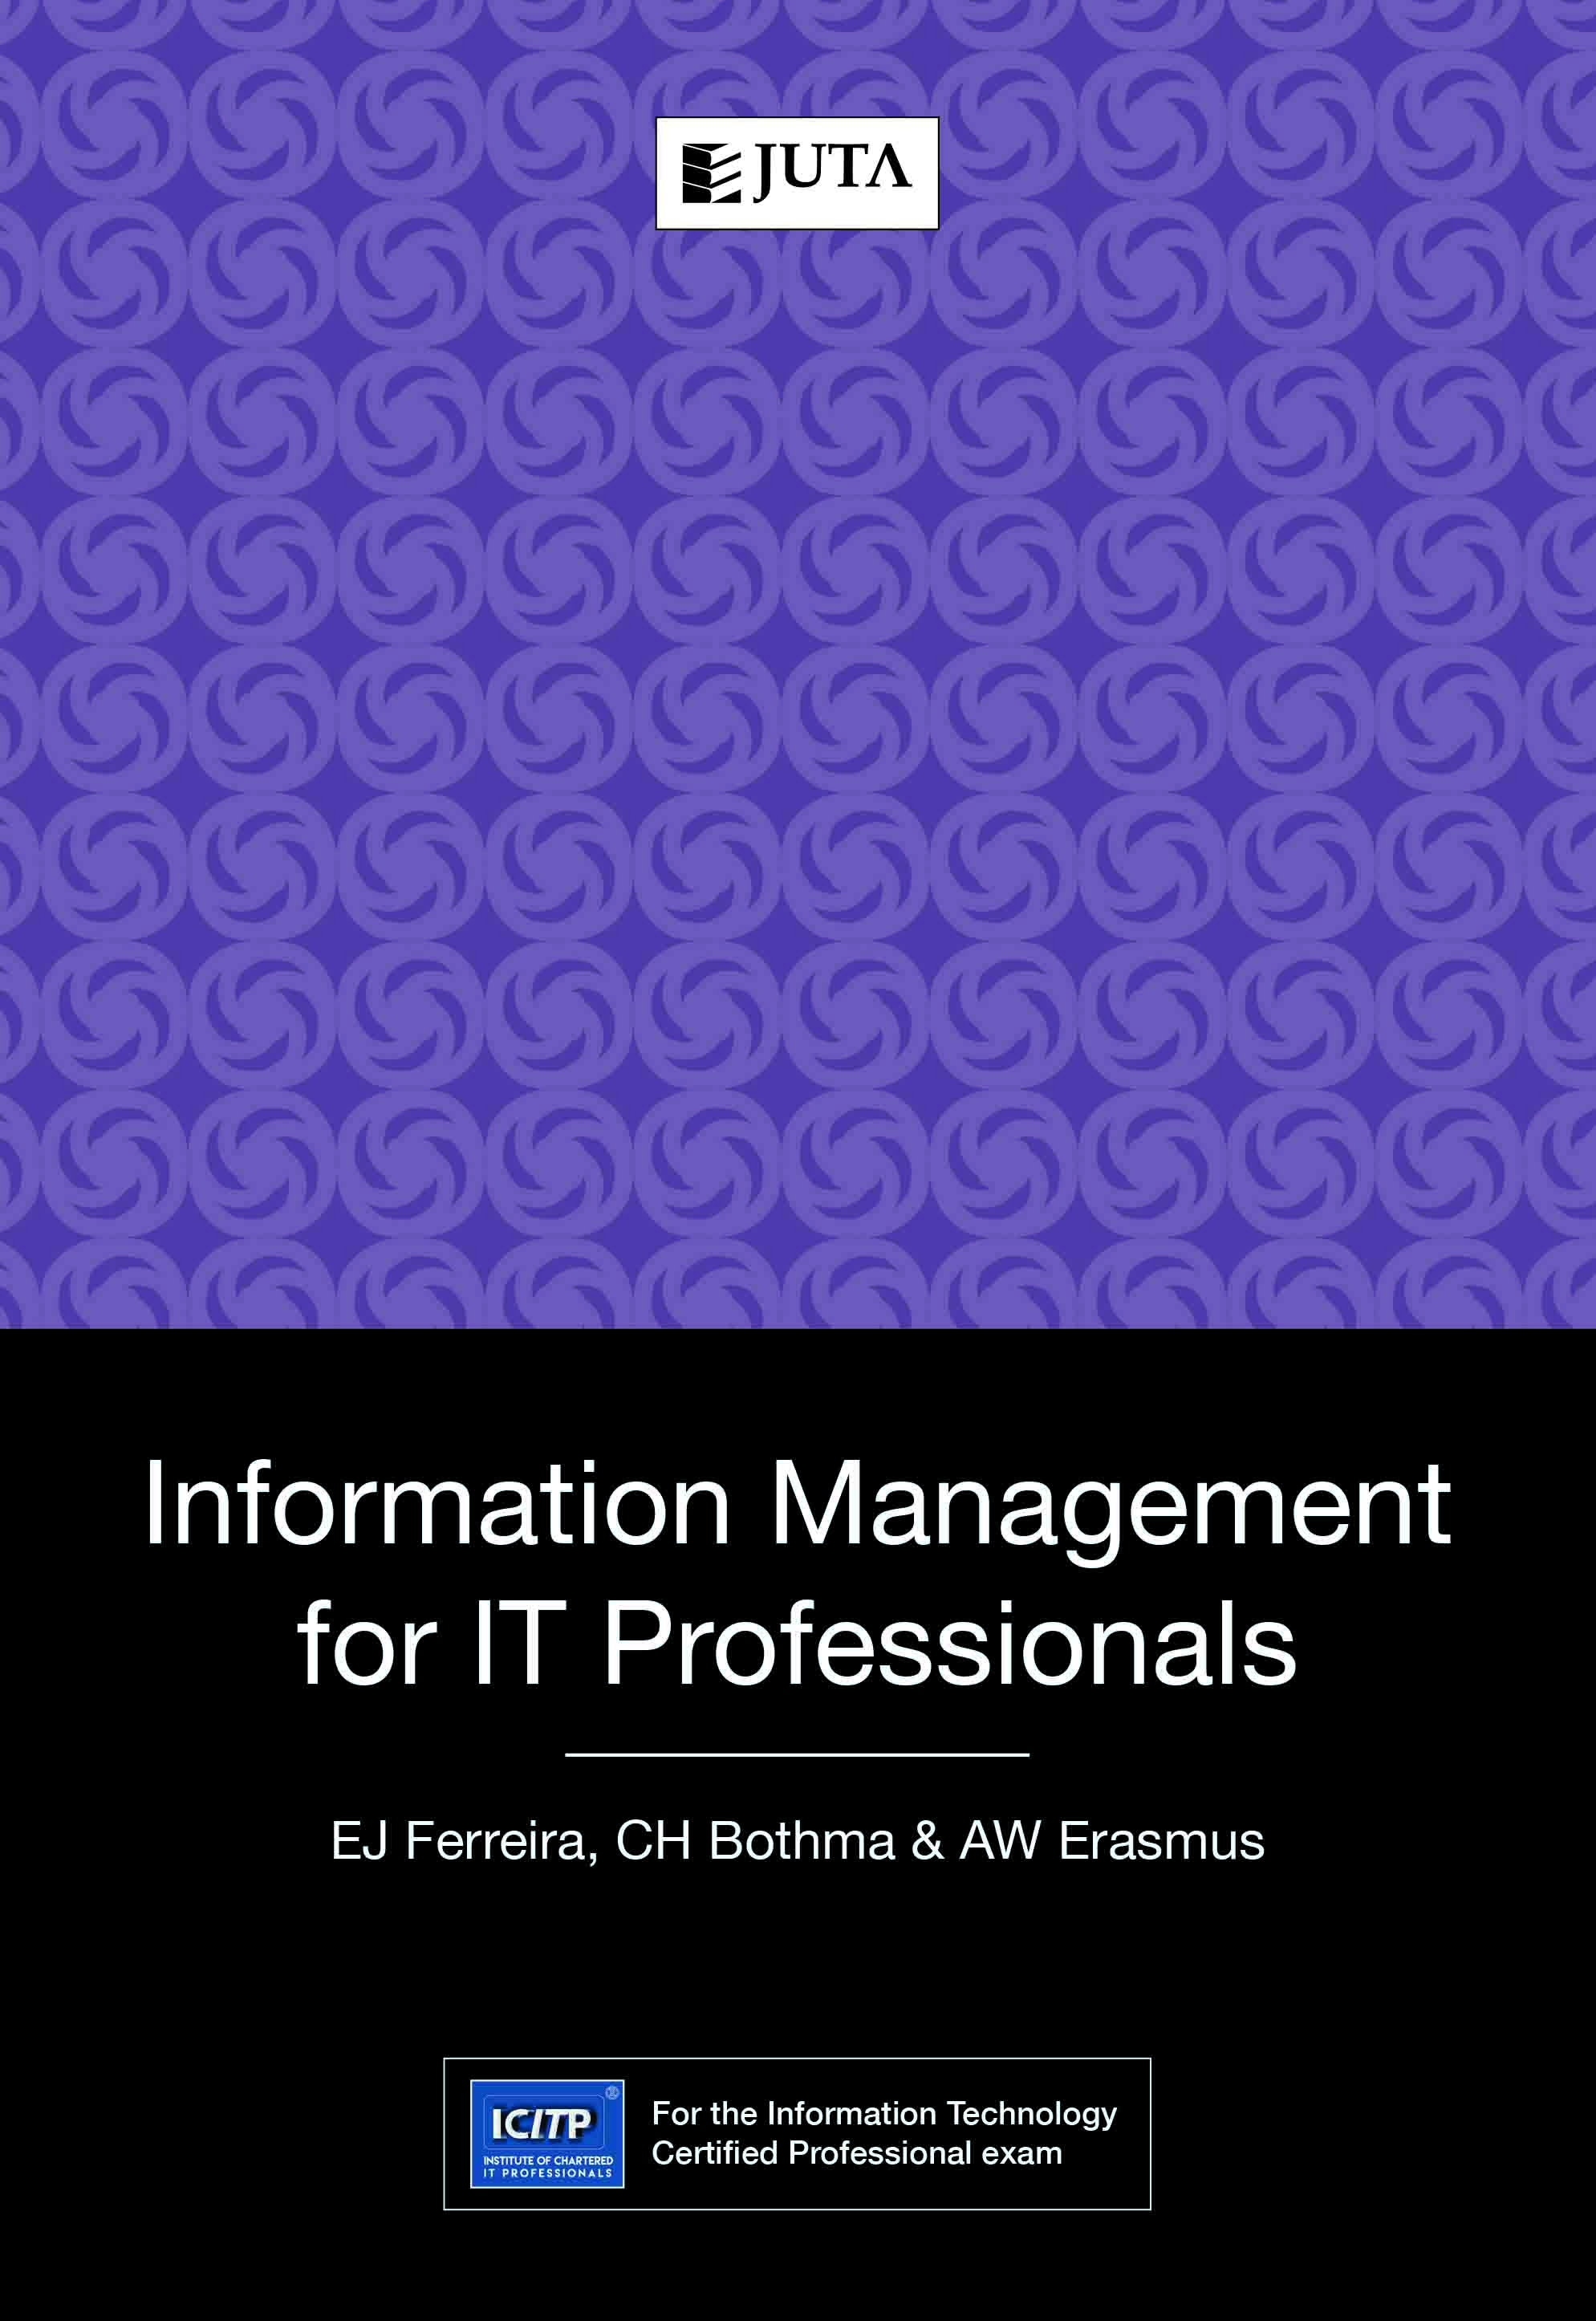 Information Management for IT Professionals